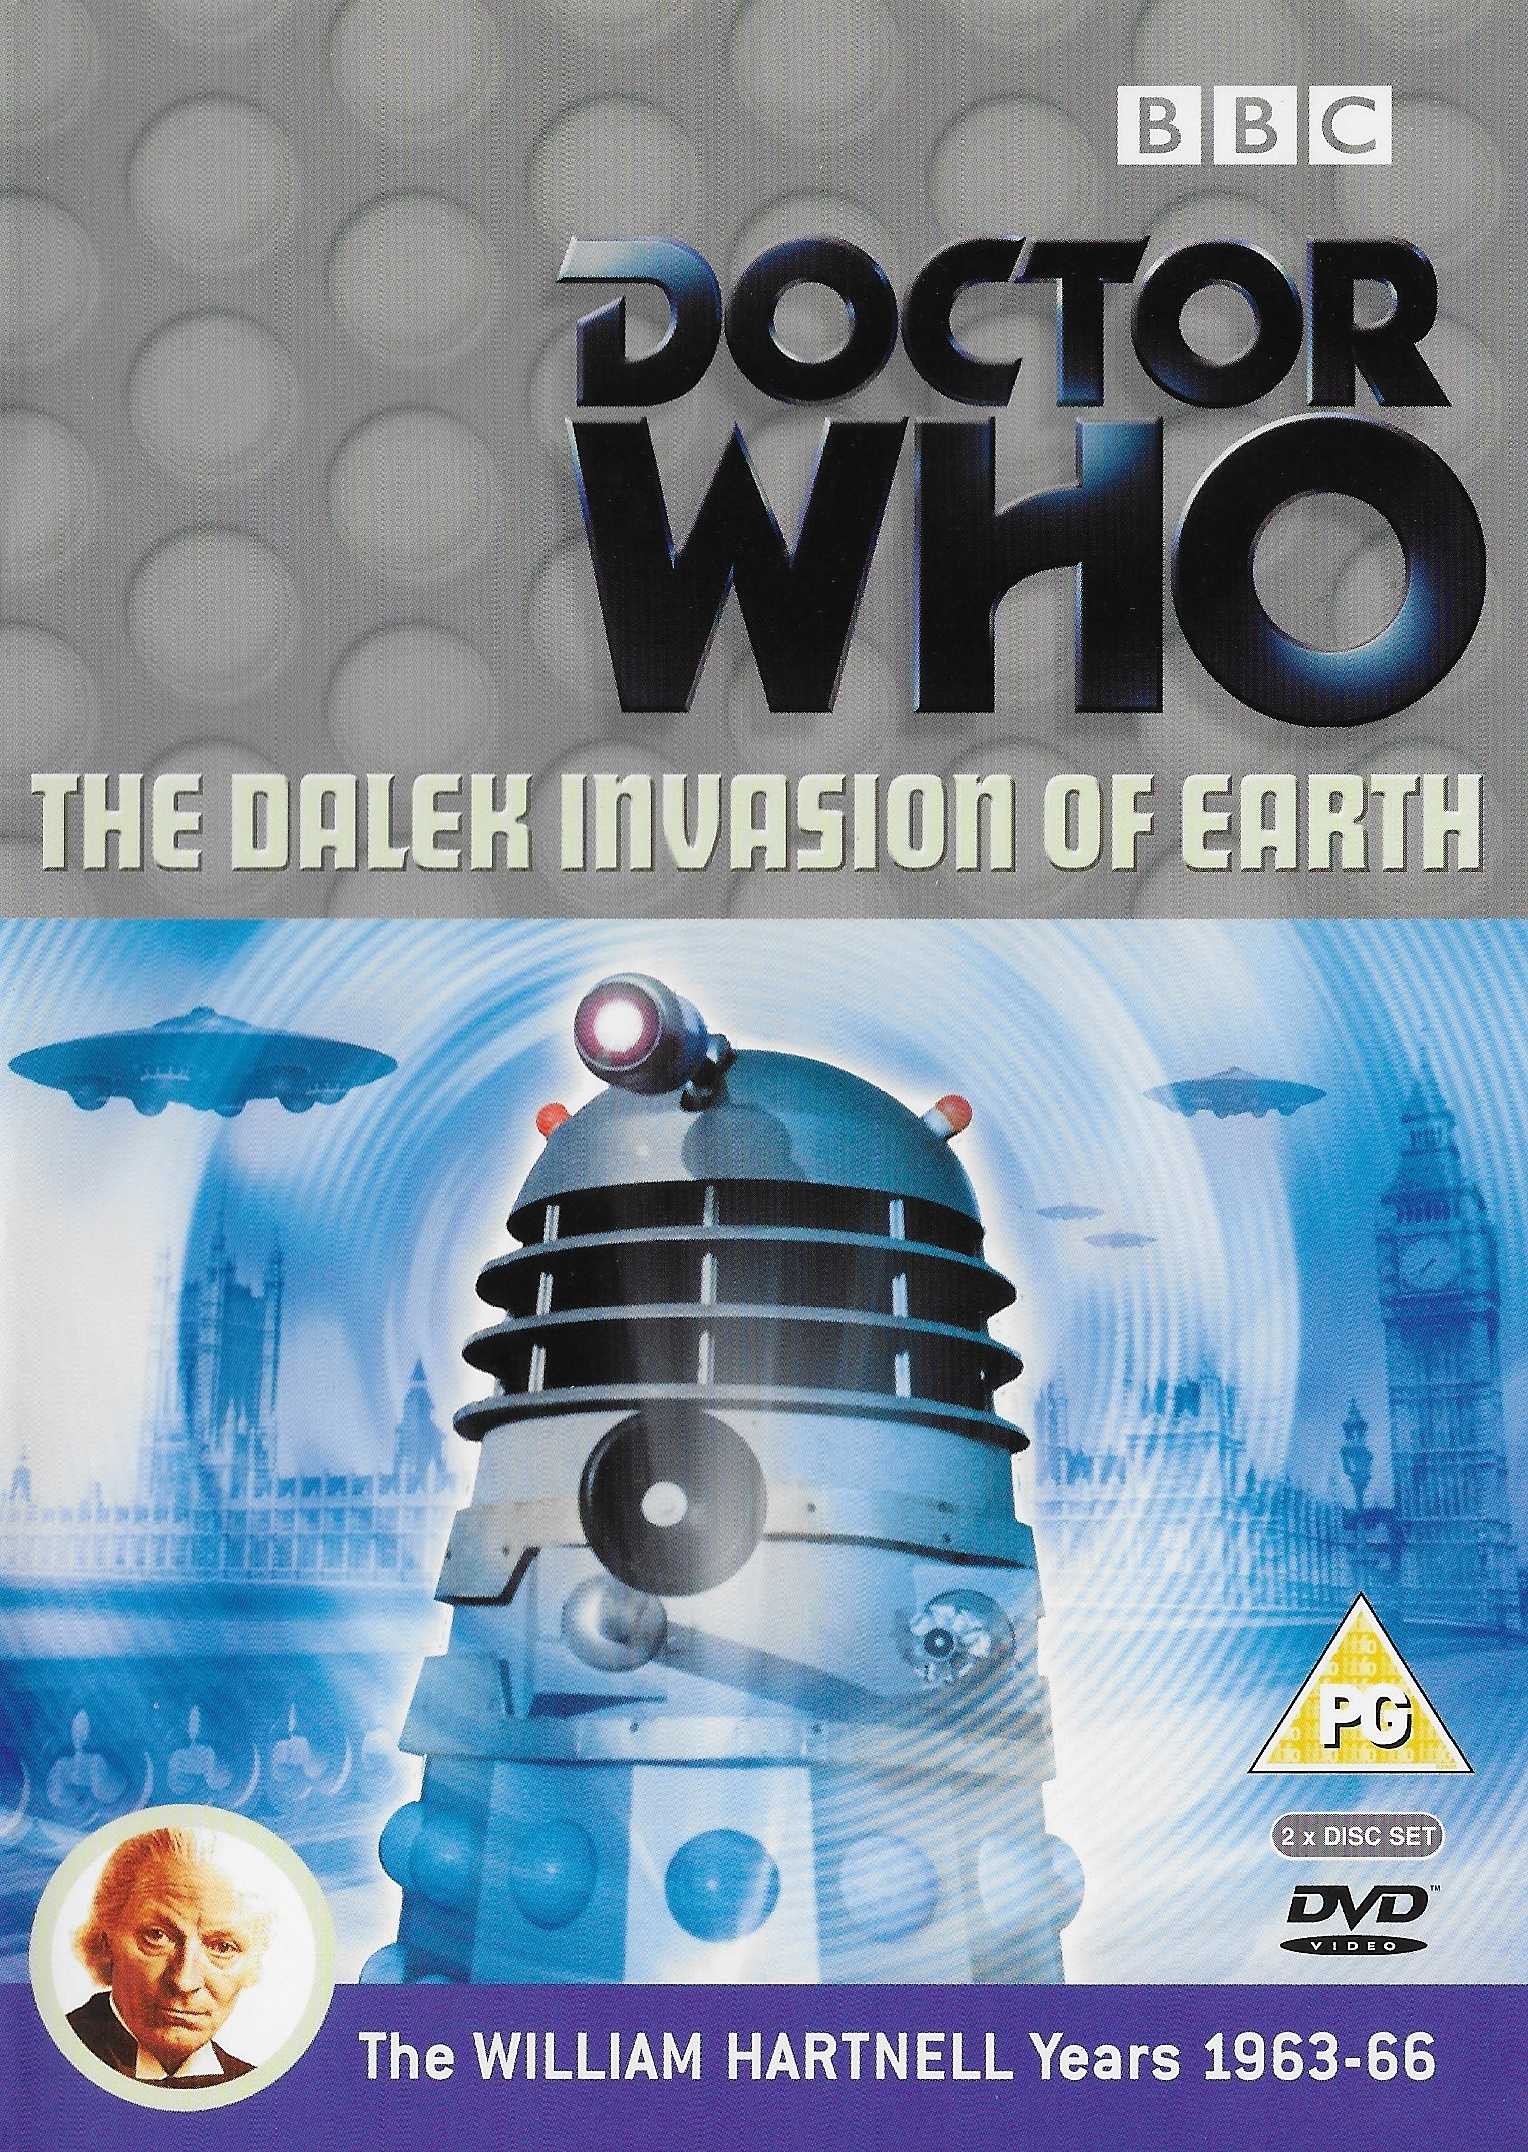 Picture of BBCDVD 1156 Doctor Who - The Dalek invasion of Earth by artist Terry Nation from the BBC records and Tapes library